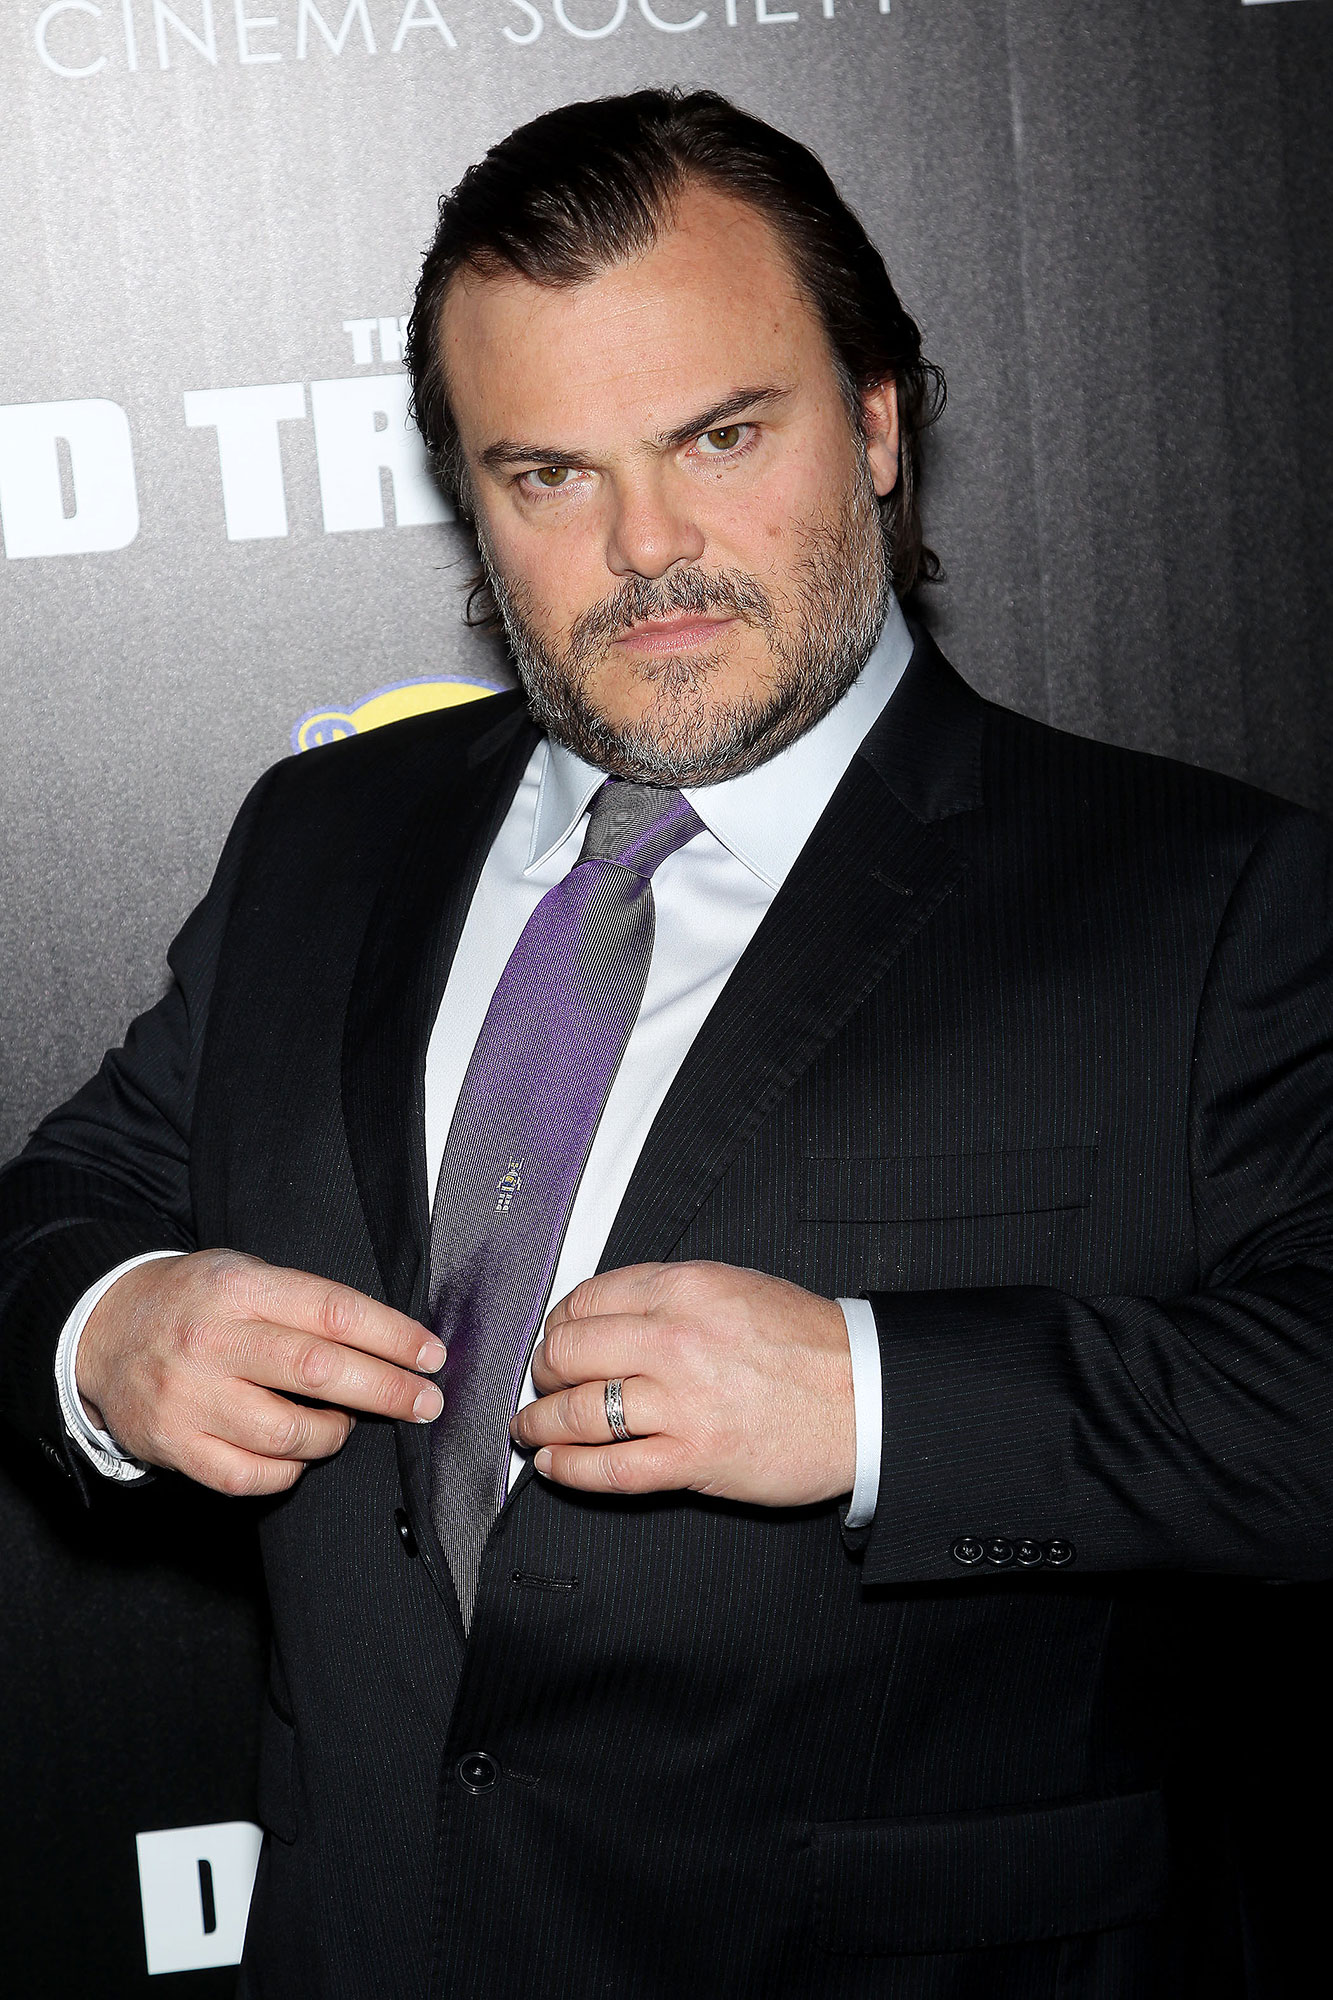 Jack Black Opens Up About Losing Brother to AIDS, Past Drug Abuse Us